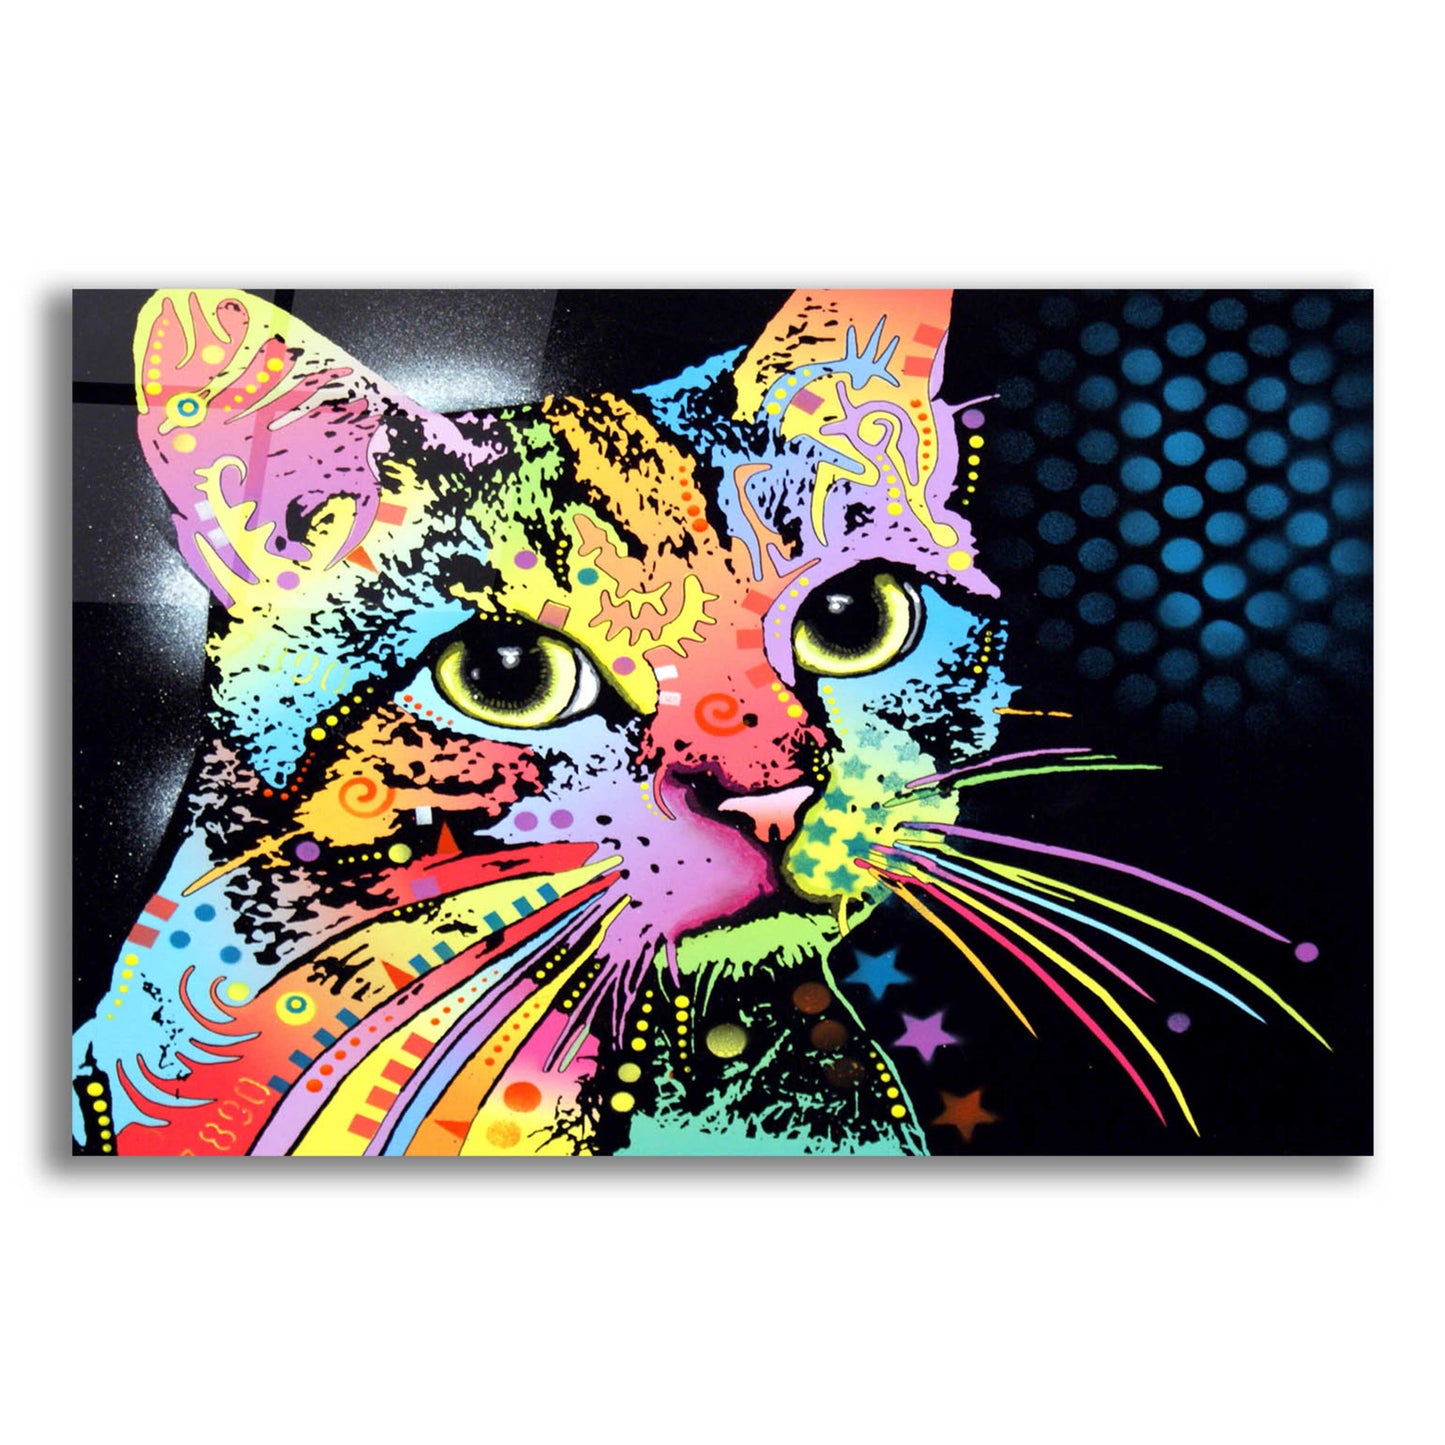 Epic Art 'Catillac New' by Dean Russo, Acrylic Glass Wall Art,16x12